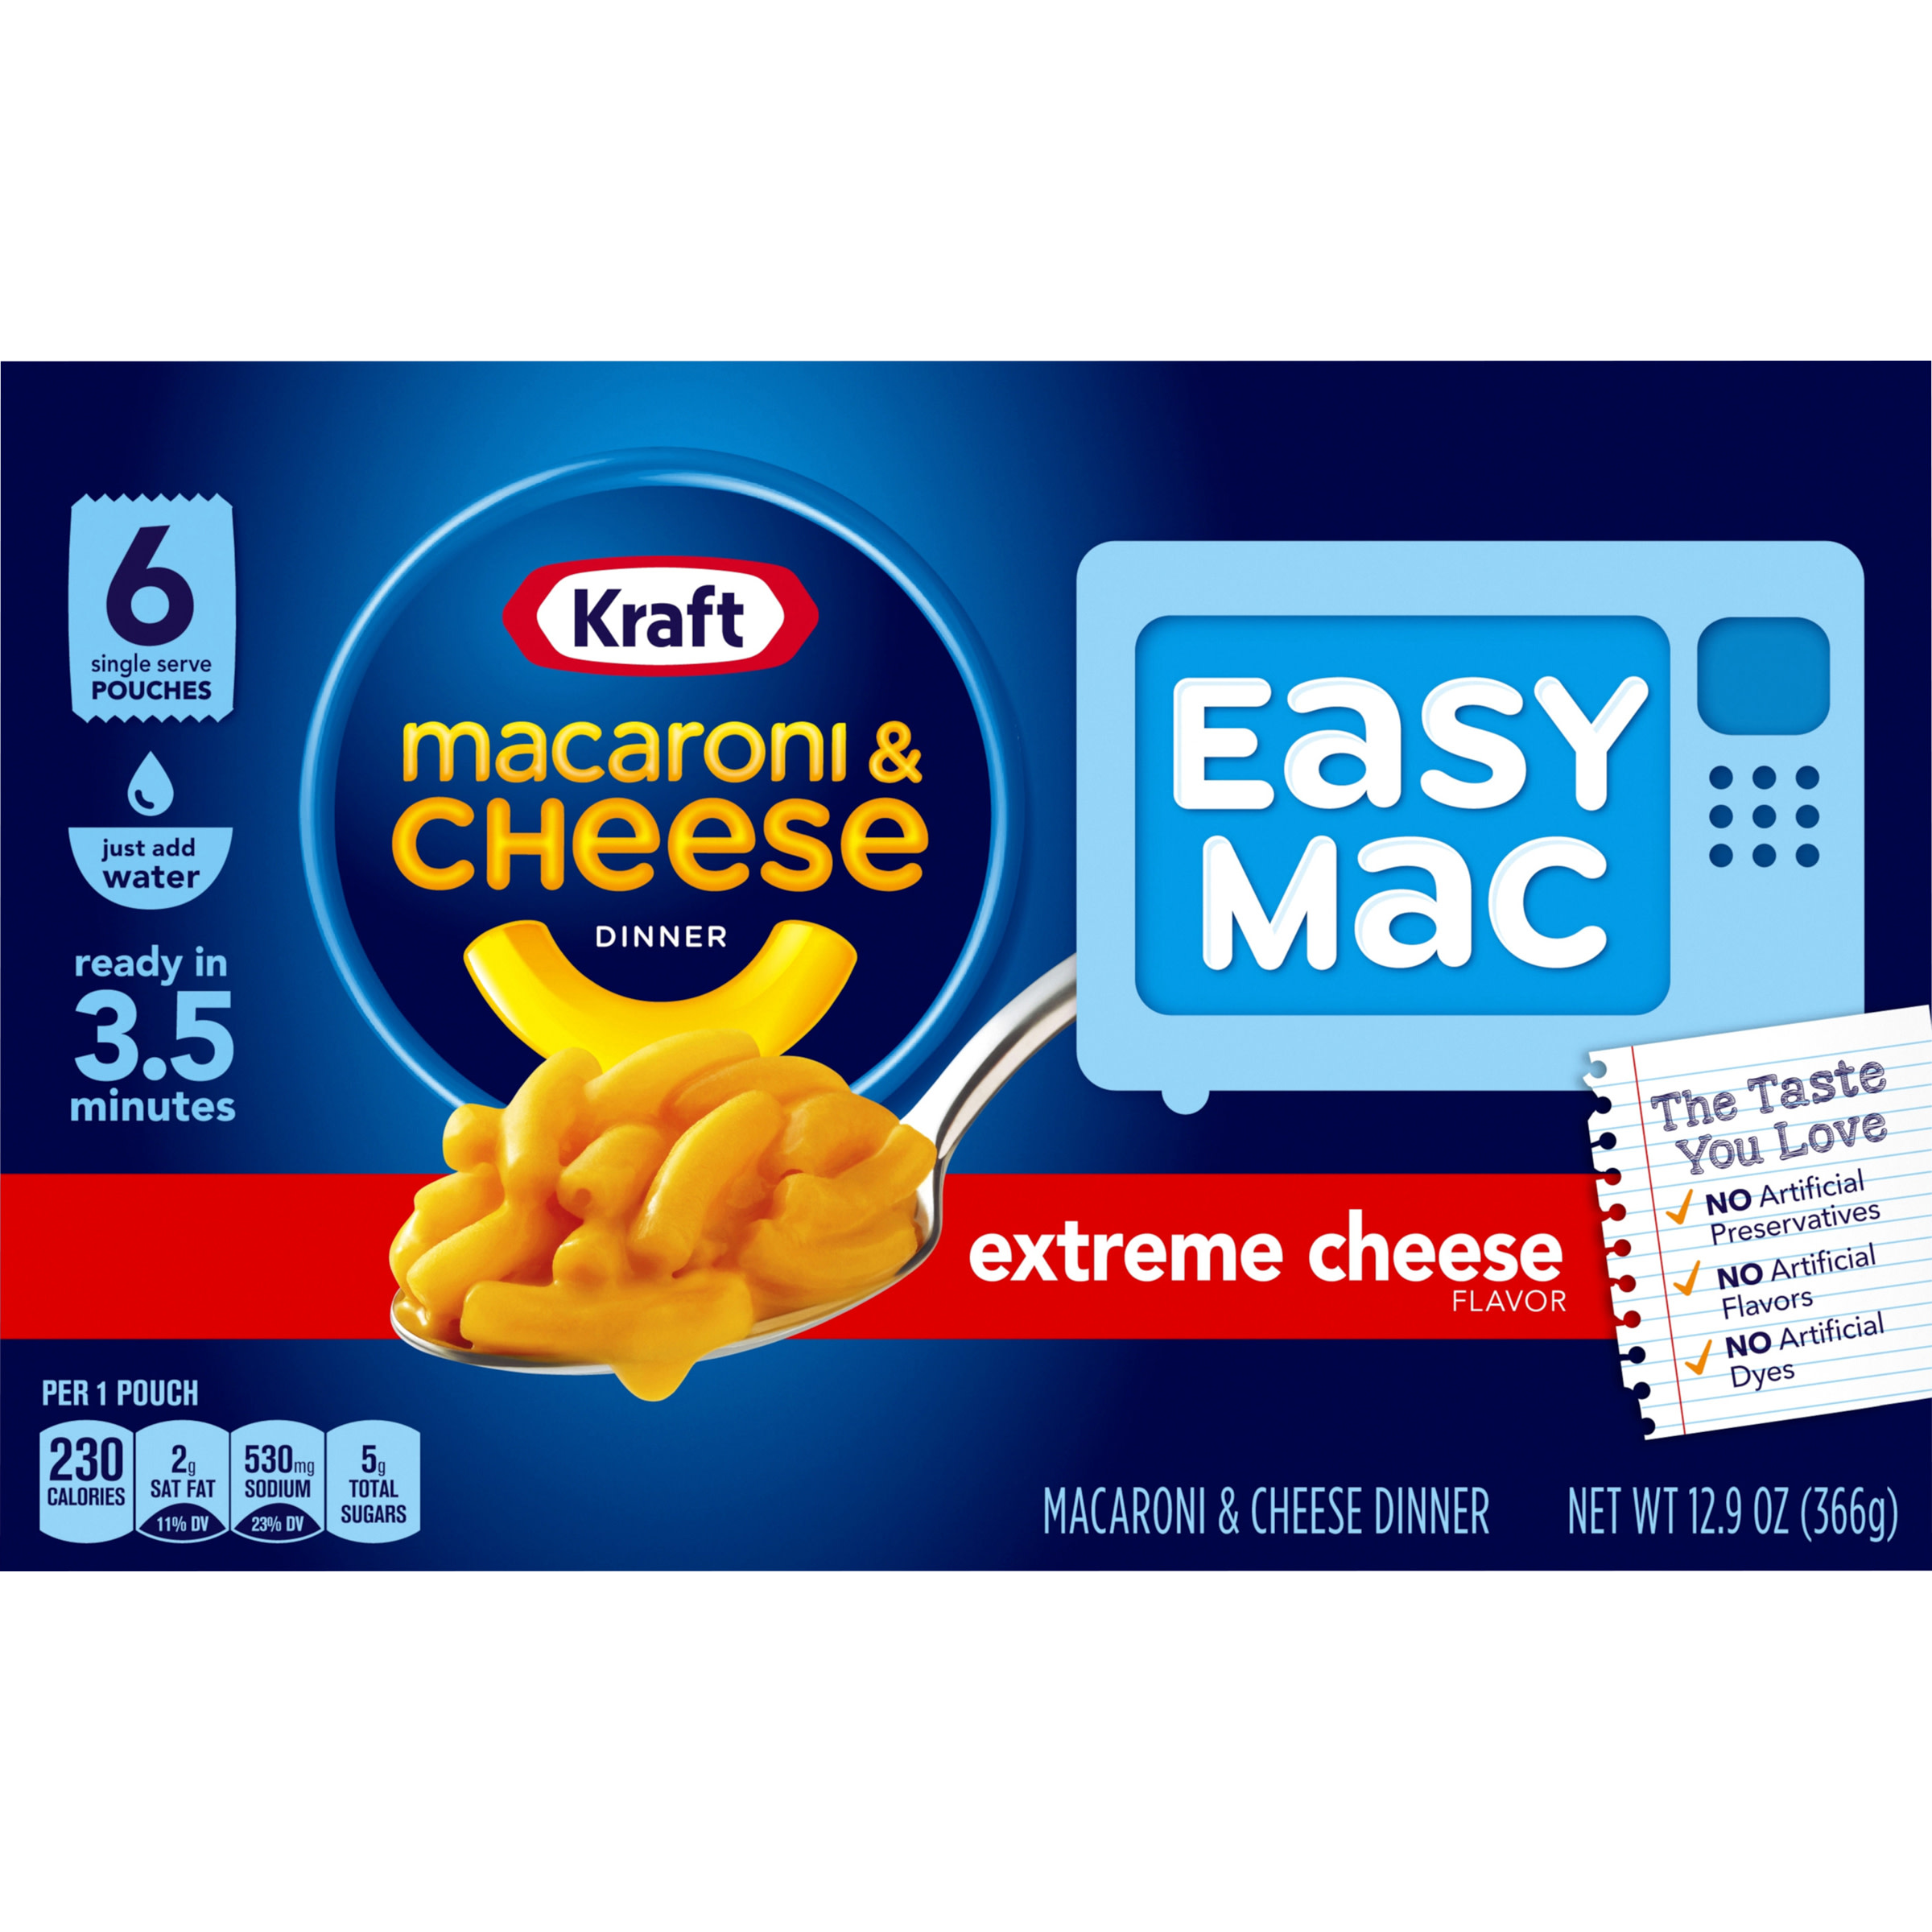 Kraft Easy Mac Extreme Cheese Mac N Cheese Macaroni and Cheese Microwavable Dinner, 6 ct Packets - image 2 of 8